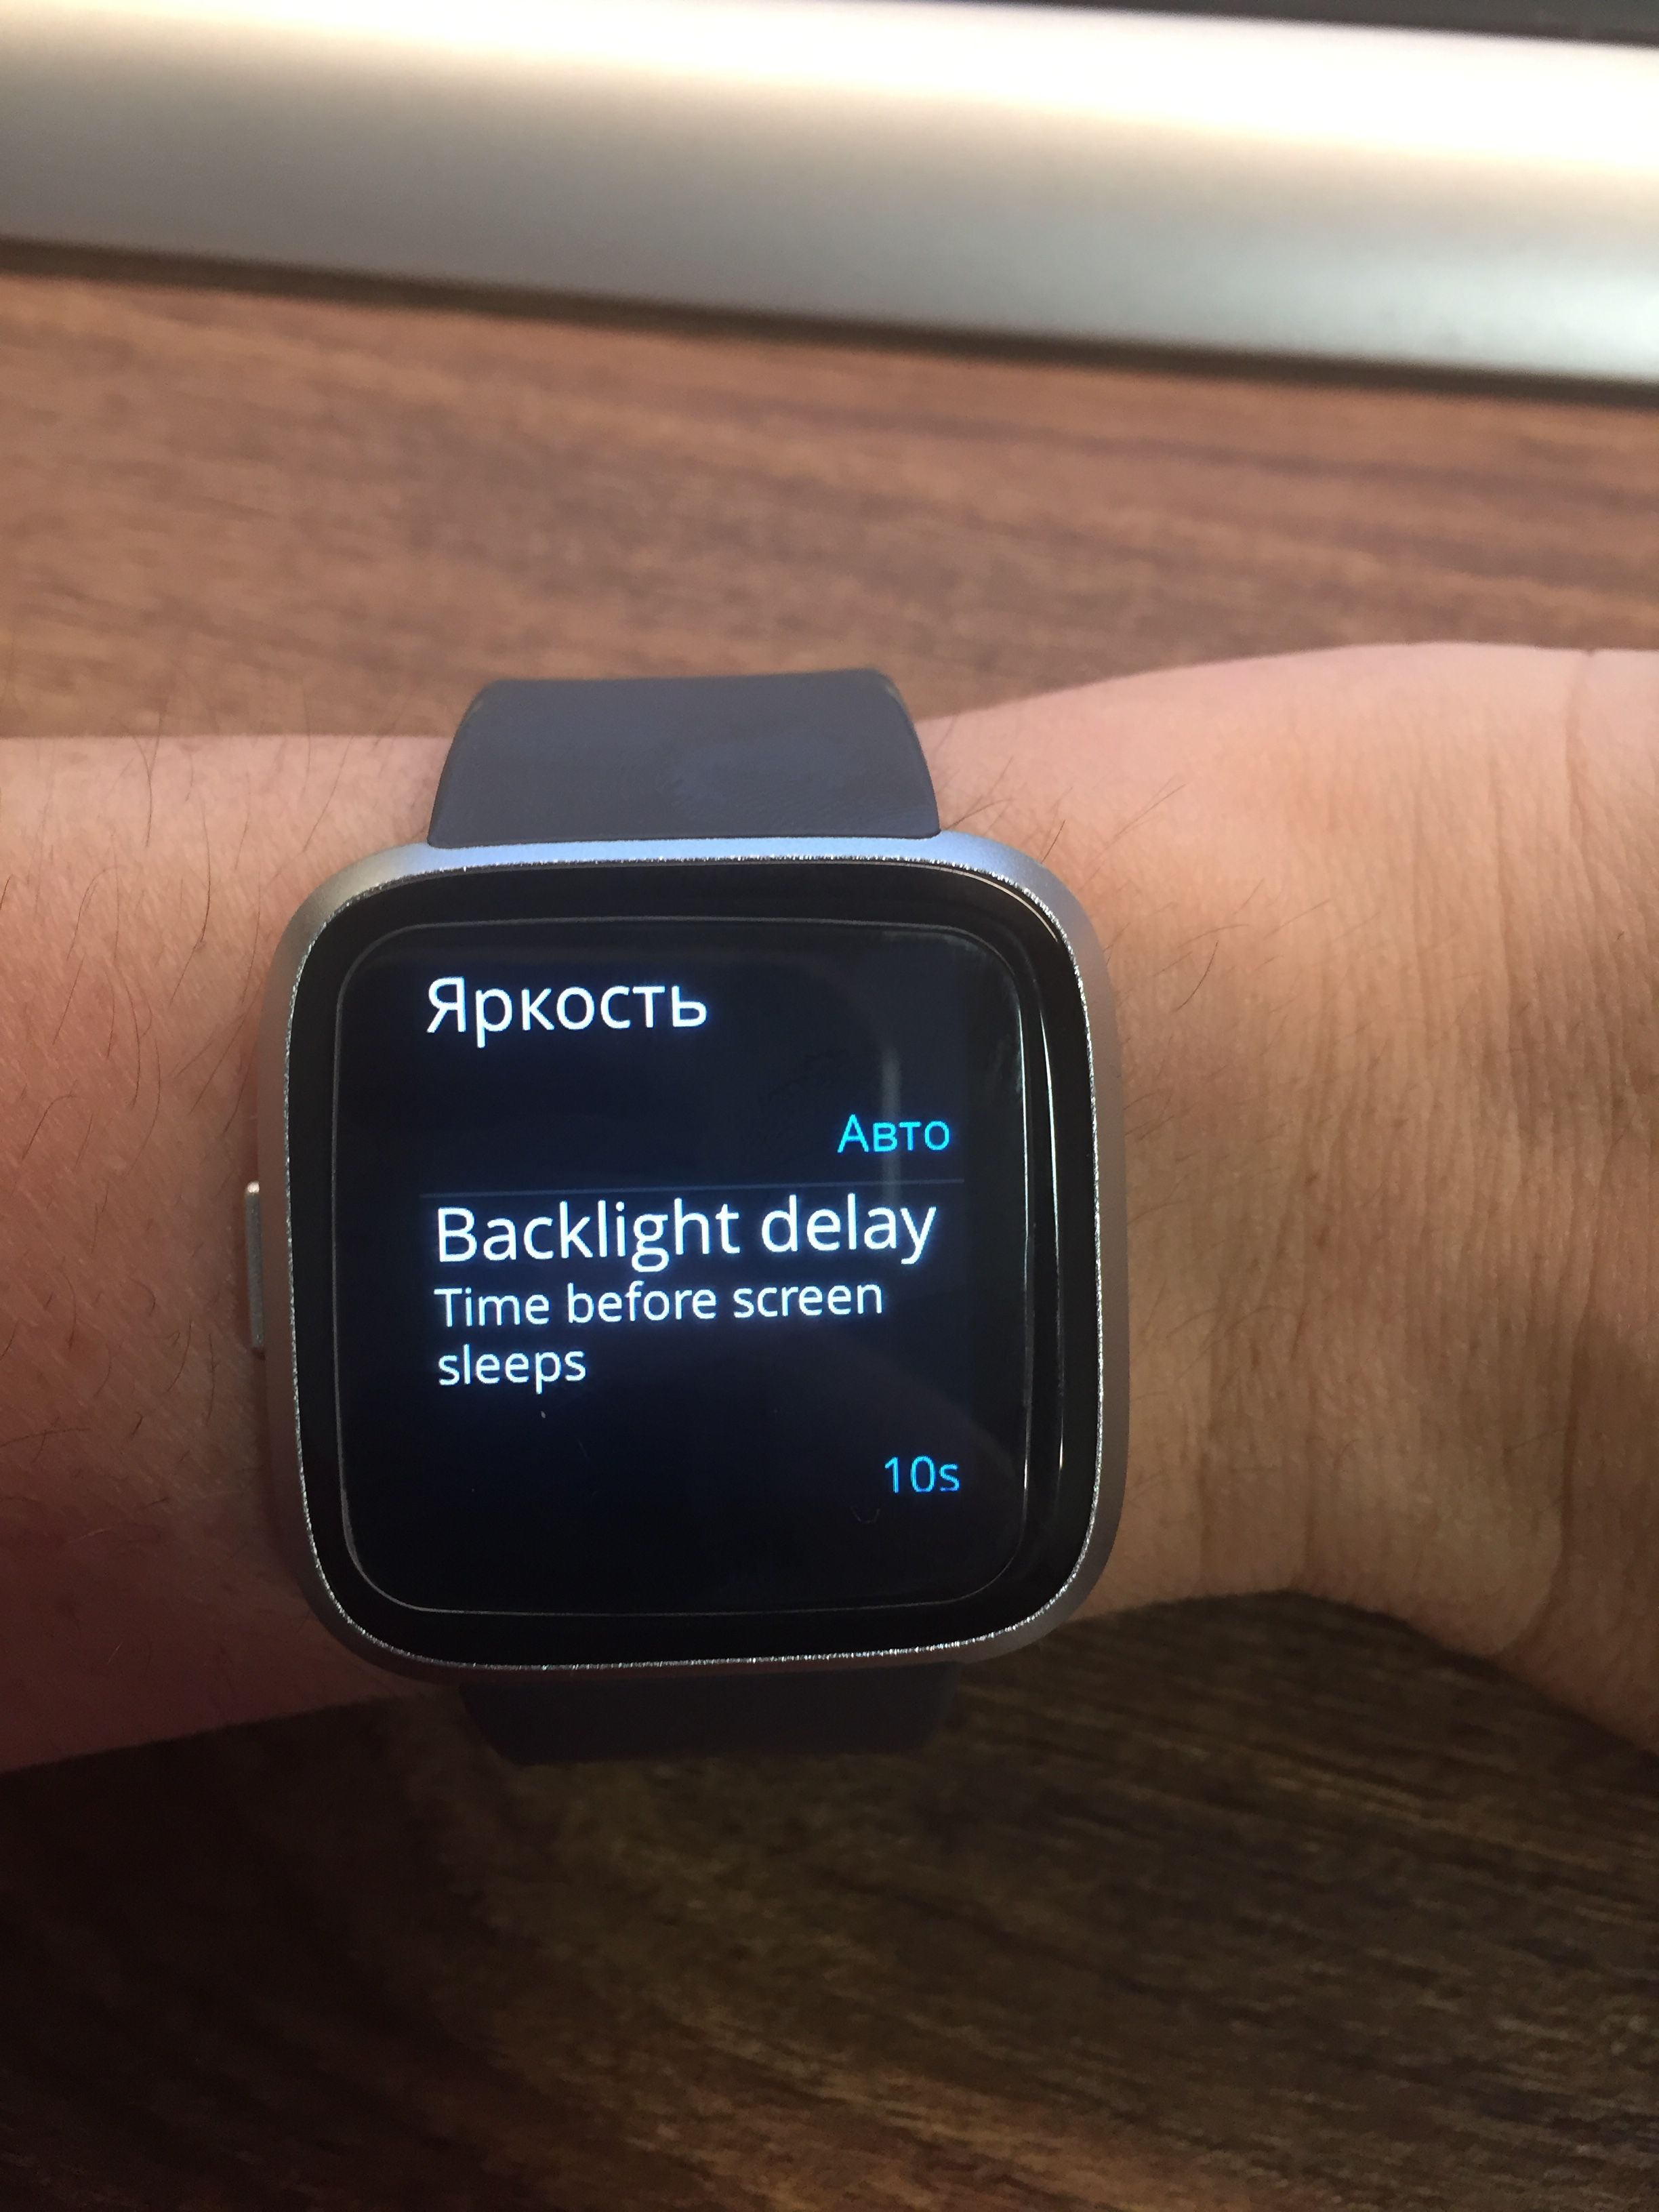 how to change the language on fitbit versa